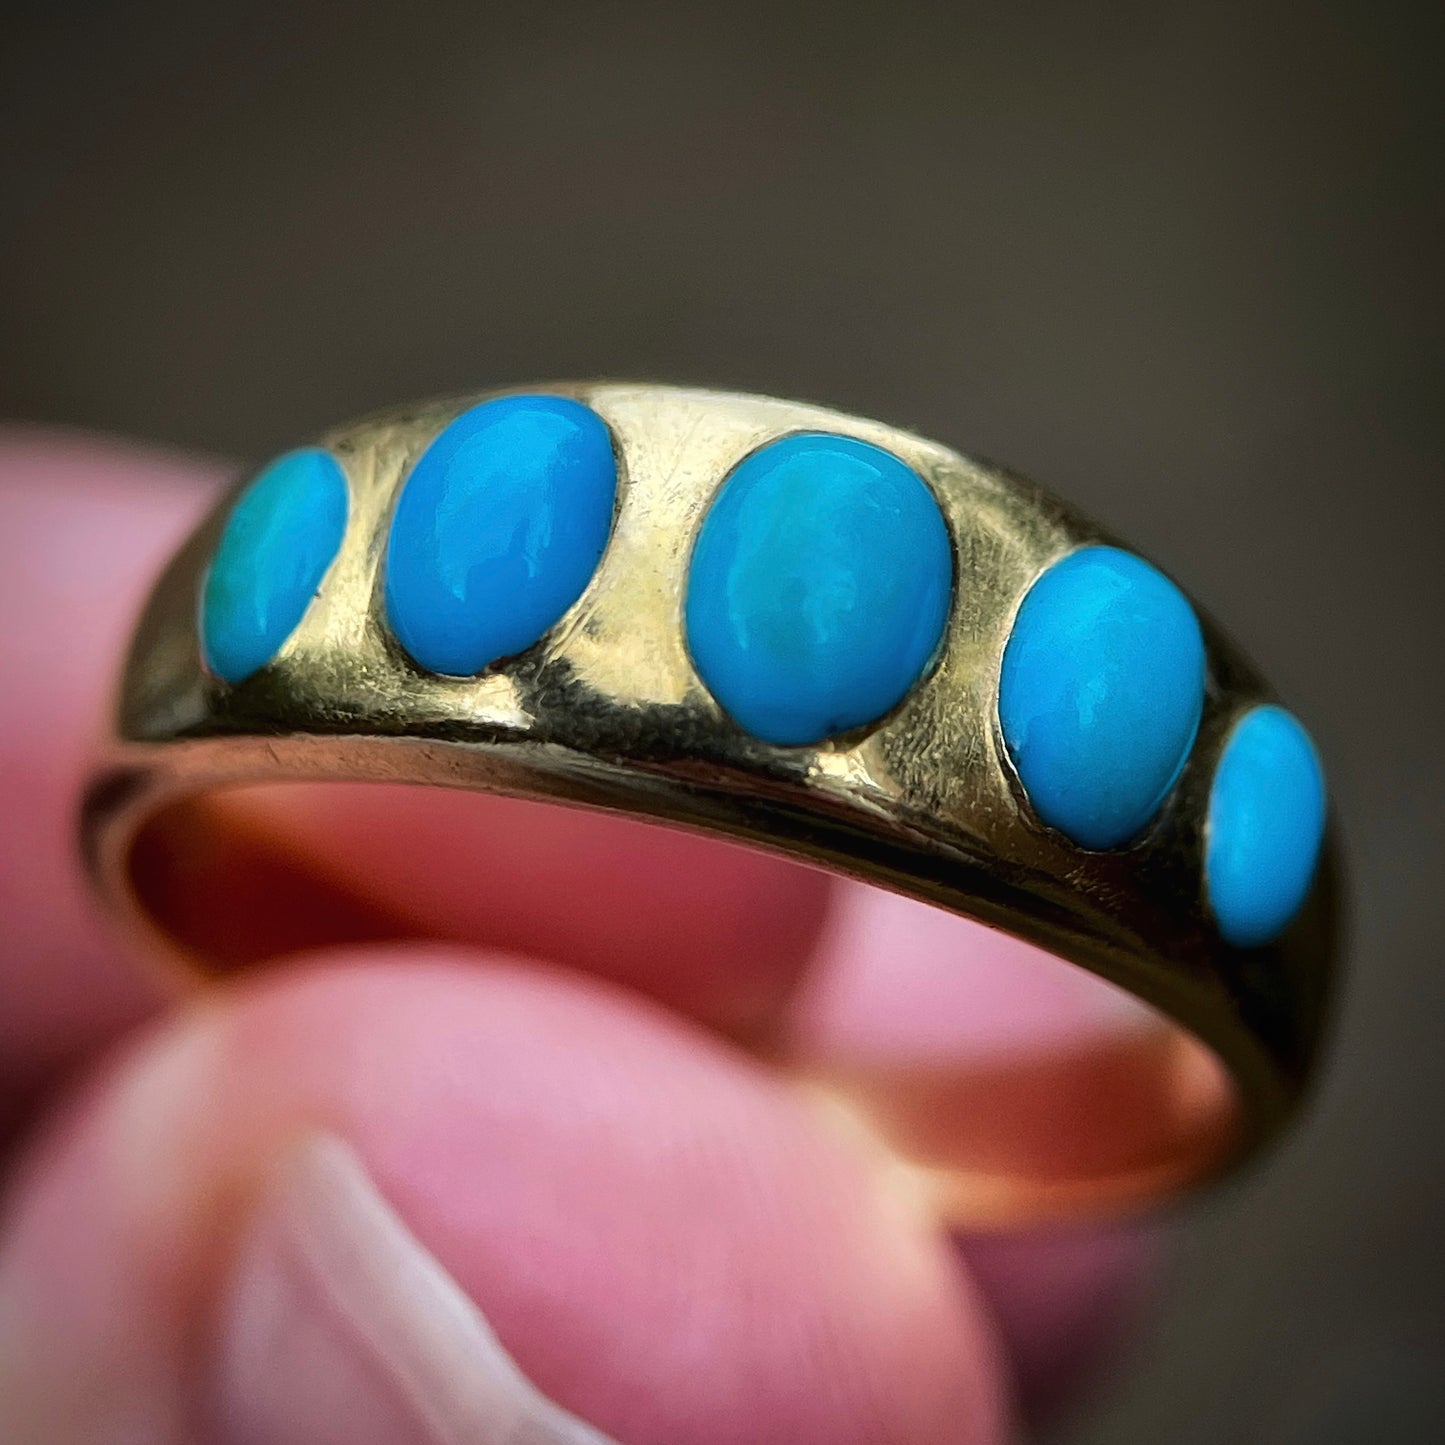 18ct Gold Antique Victorian Turquoise 5 Stone Gypsy Ring size S1 /2 HEAVY 6.8g